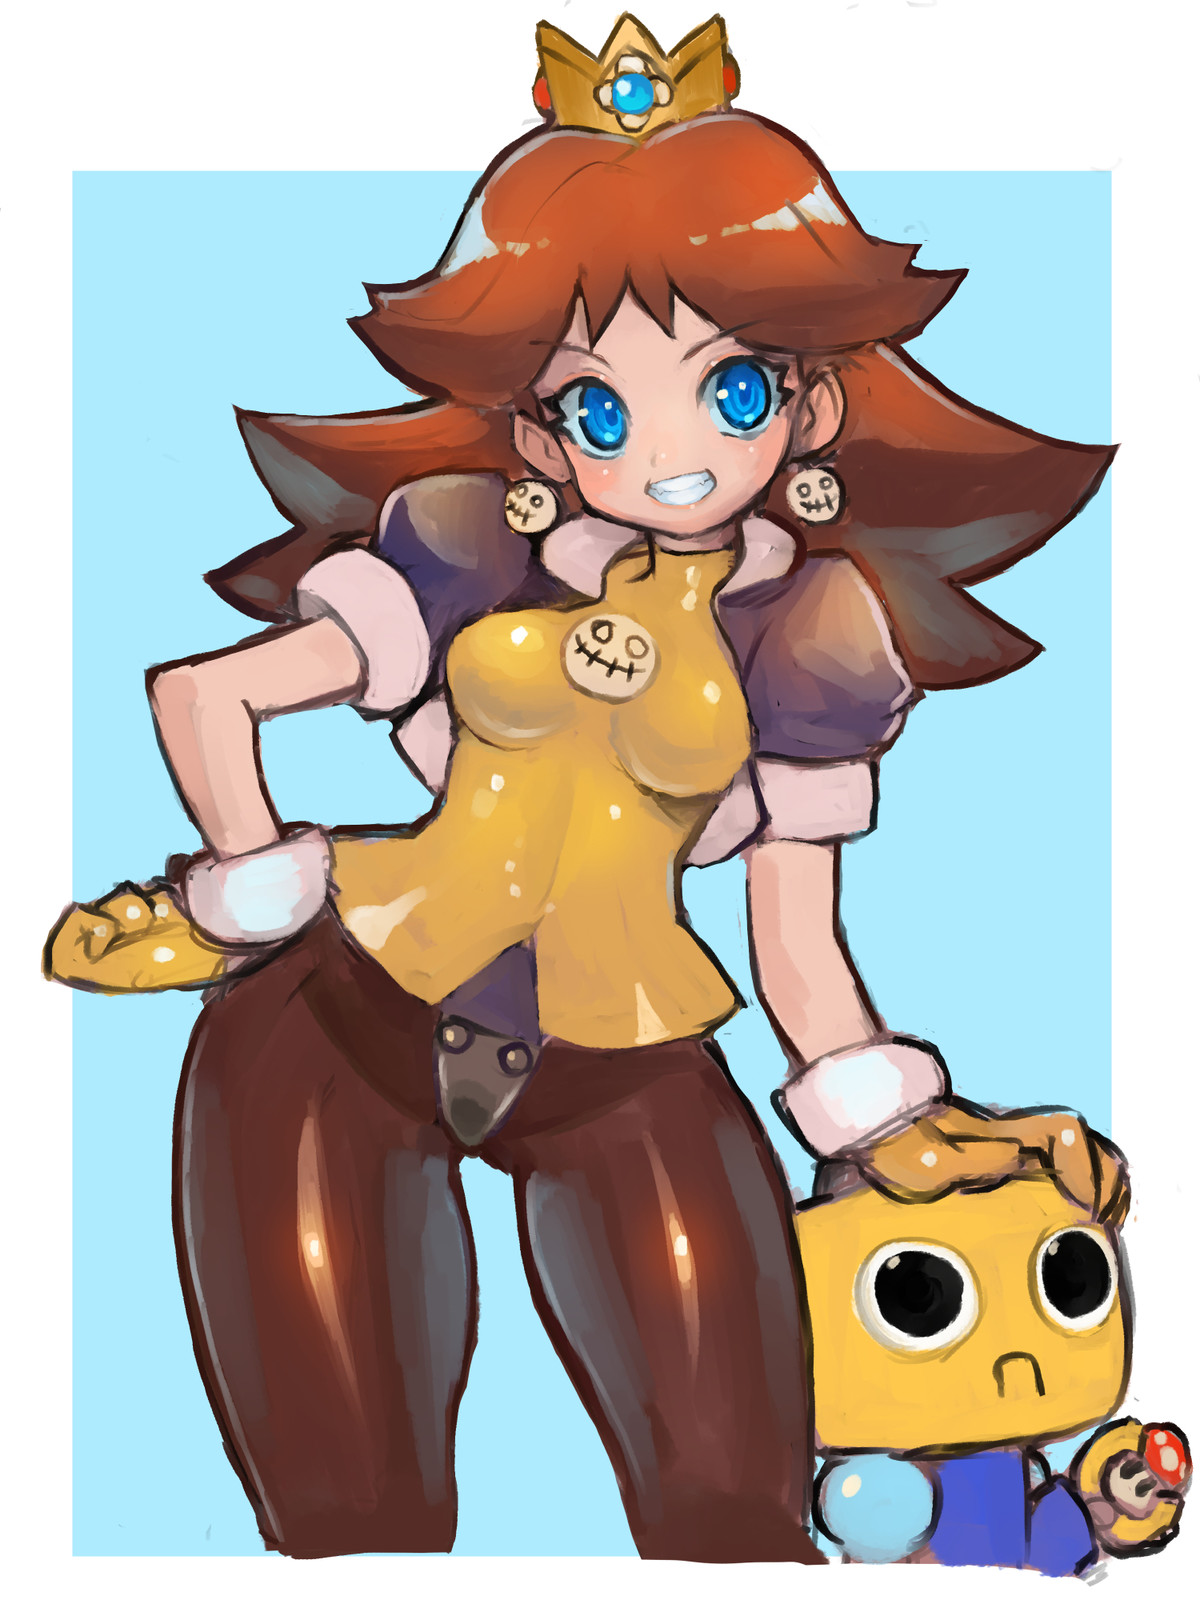 Princess Daisy as Tron Bonne by dakusuta. .. True OGs will already be thinking about that porn comic with Tron and Mega ManComment edited at .